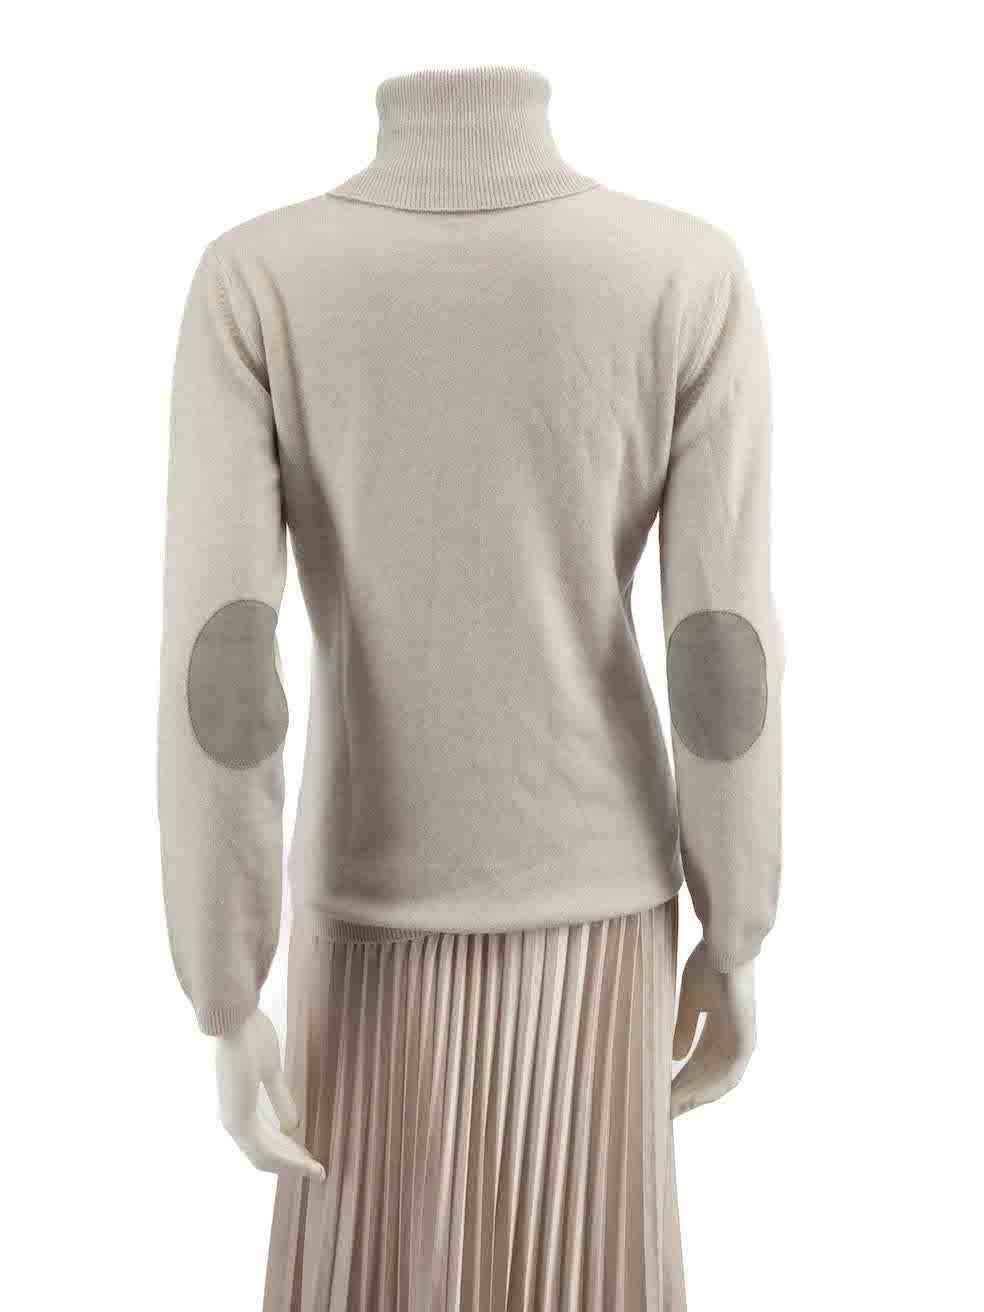 Fabiana Filippi Grey Turtleneck Knitted Jumper Size L In Good Condition For Sale In London, GB